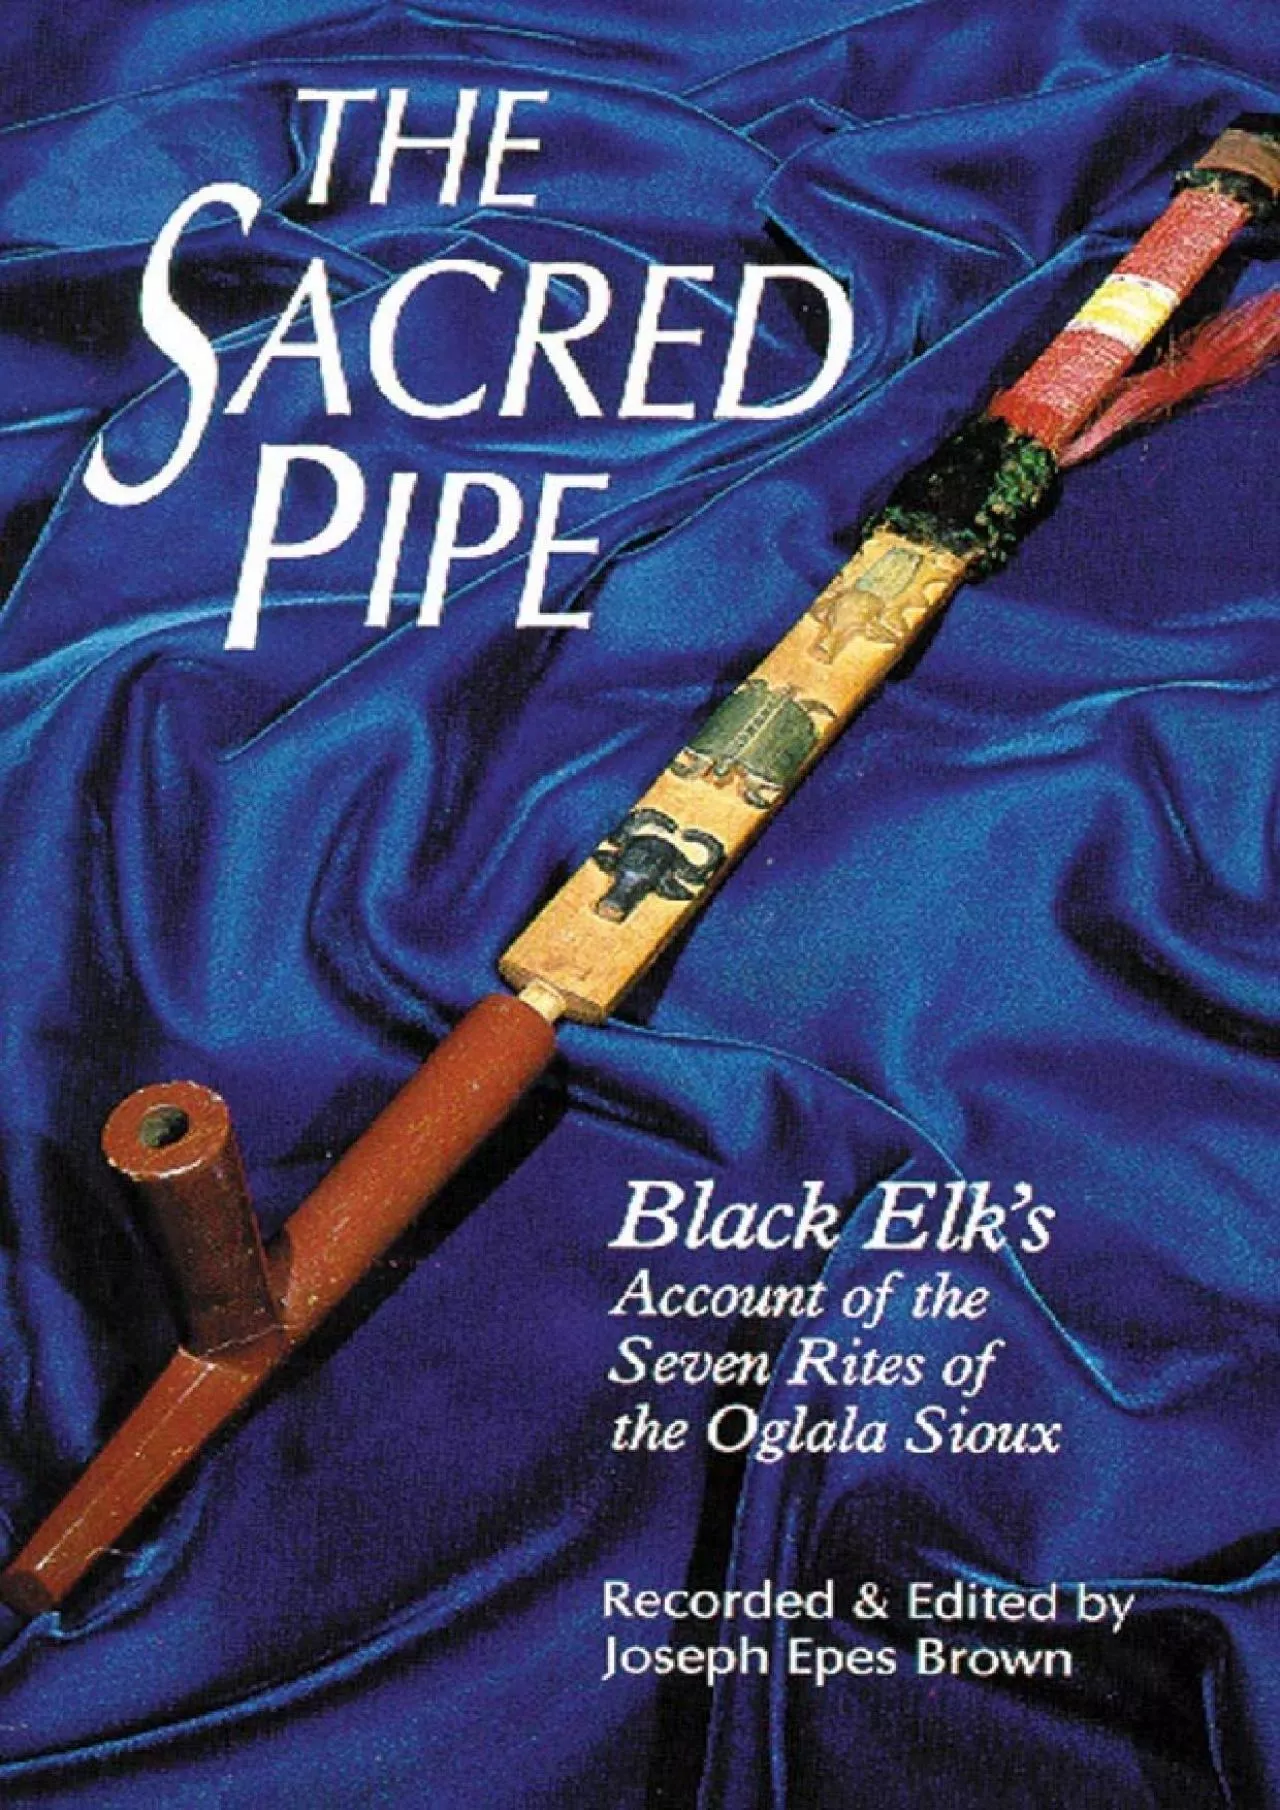 (BOOK)-The Sacred Pipe: Black Elk’s Account of the Seven Rites of the Oglala Sioux (Volume